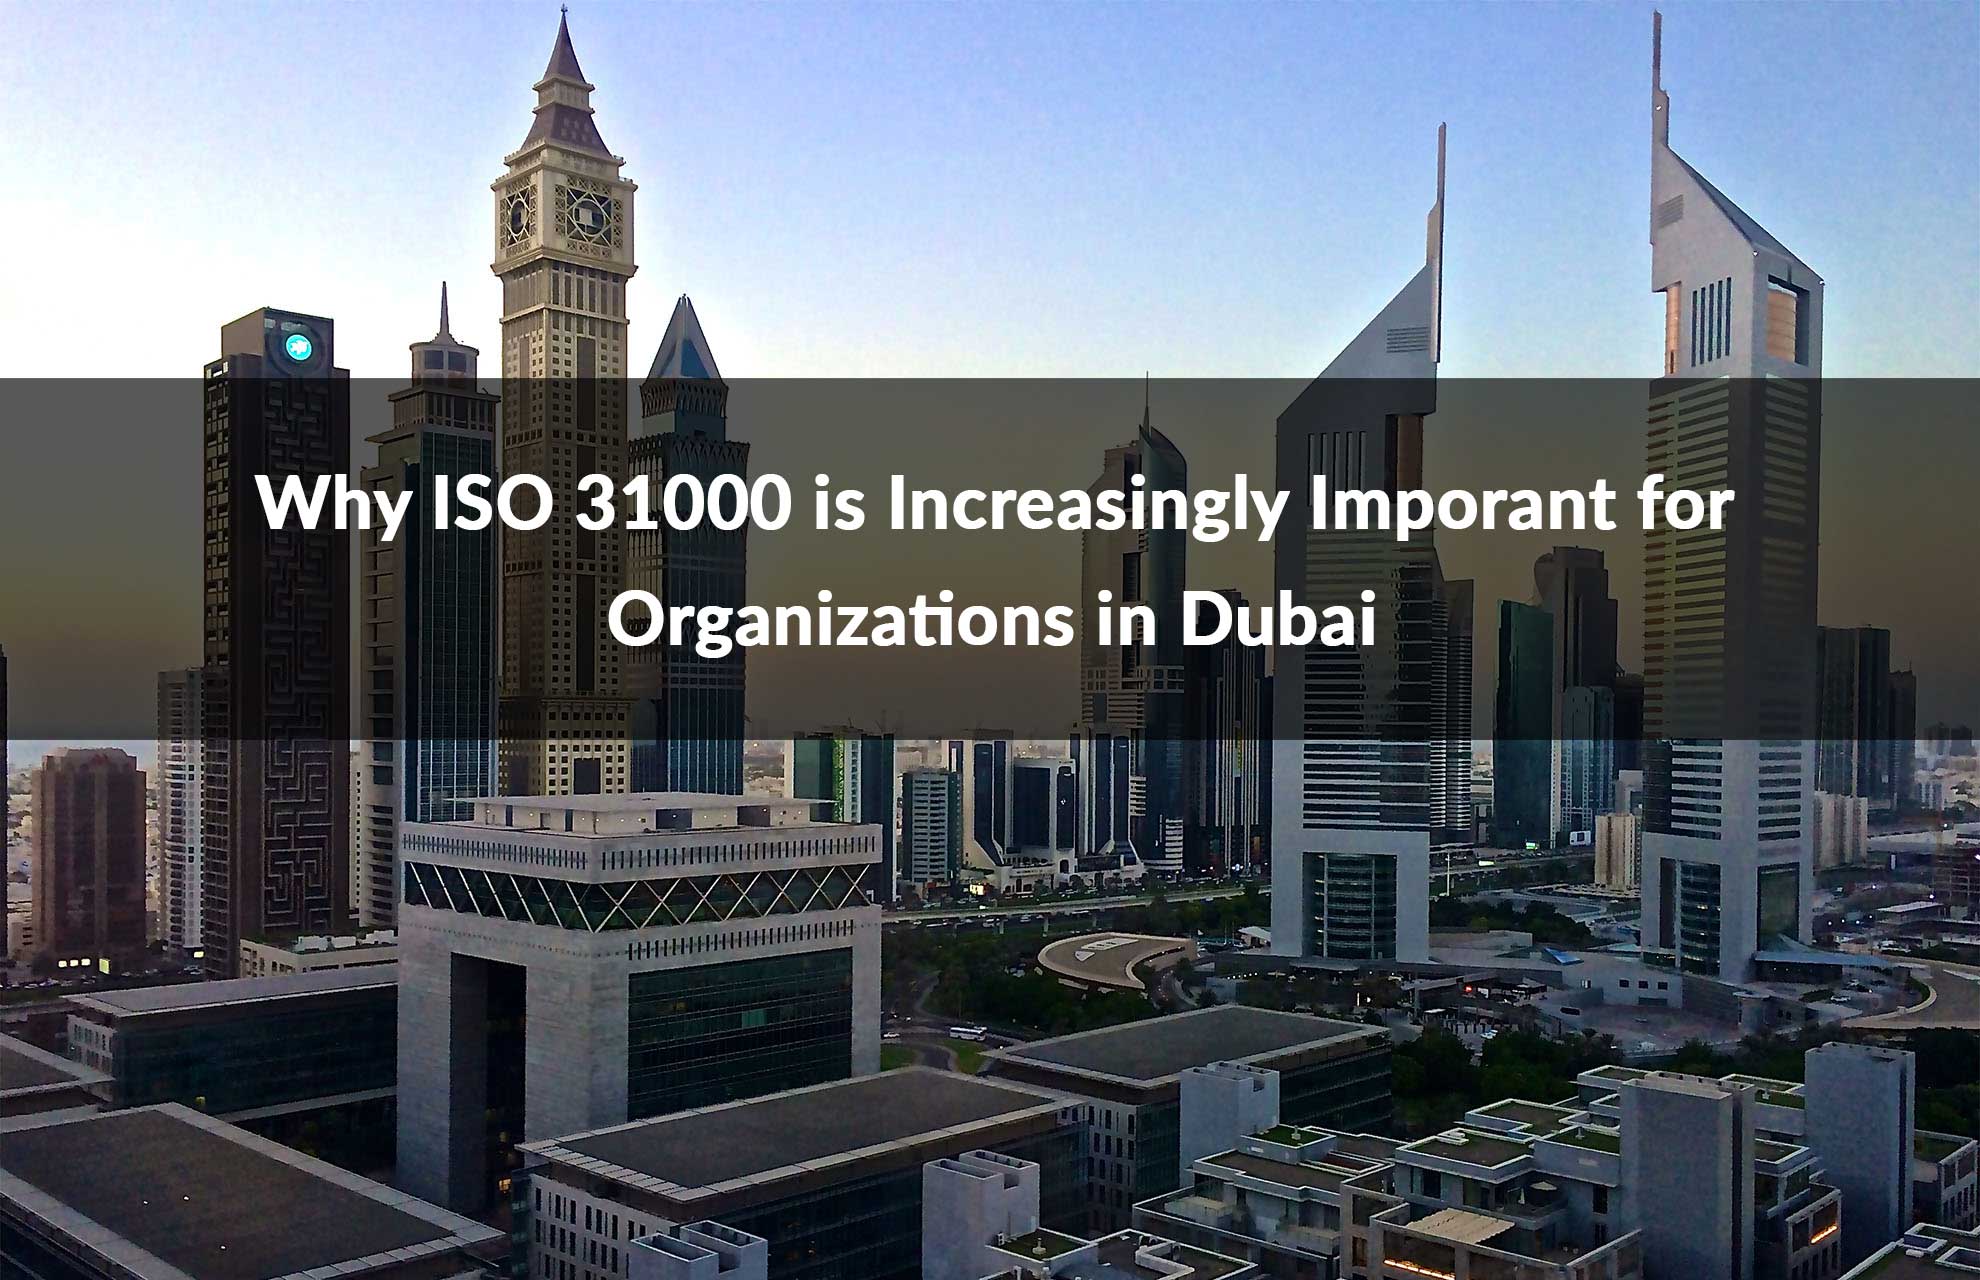 Why ISO 31000 is Increasingly Important for Organizations in Dubai